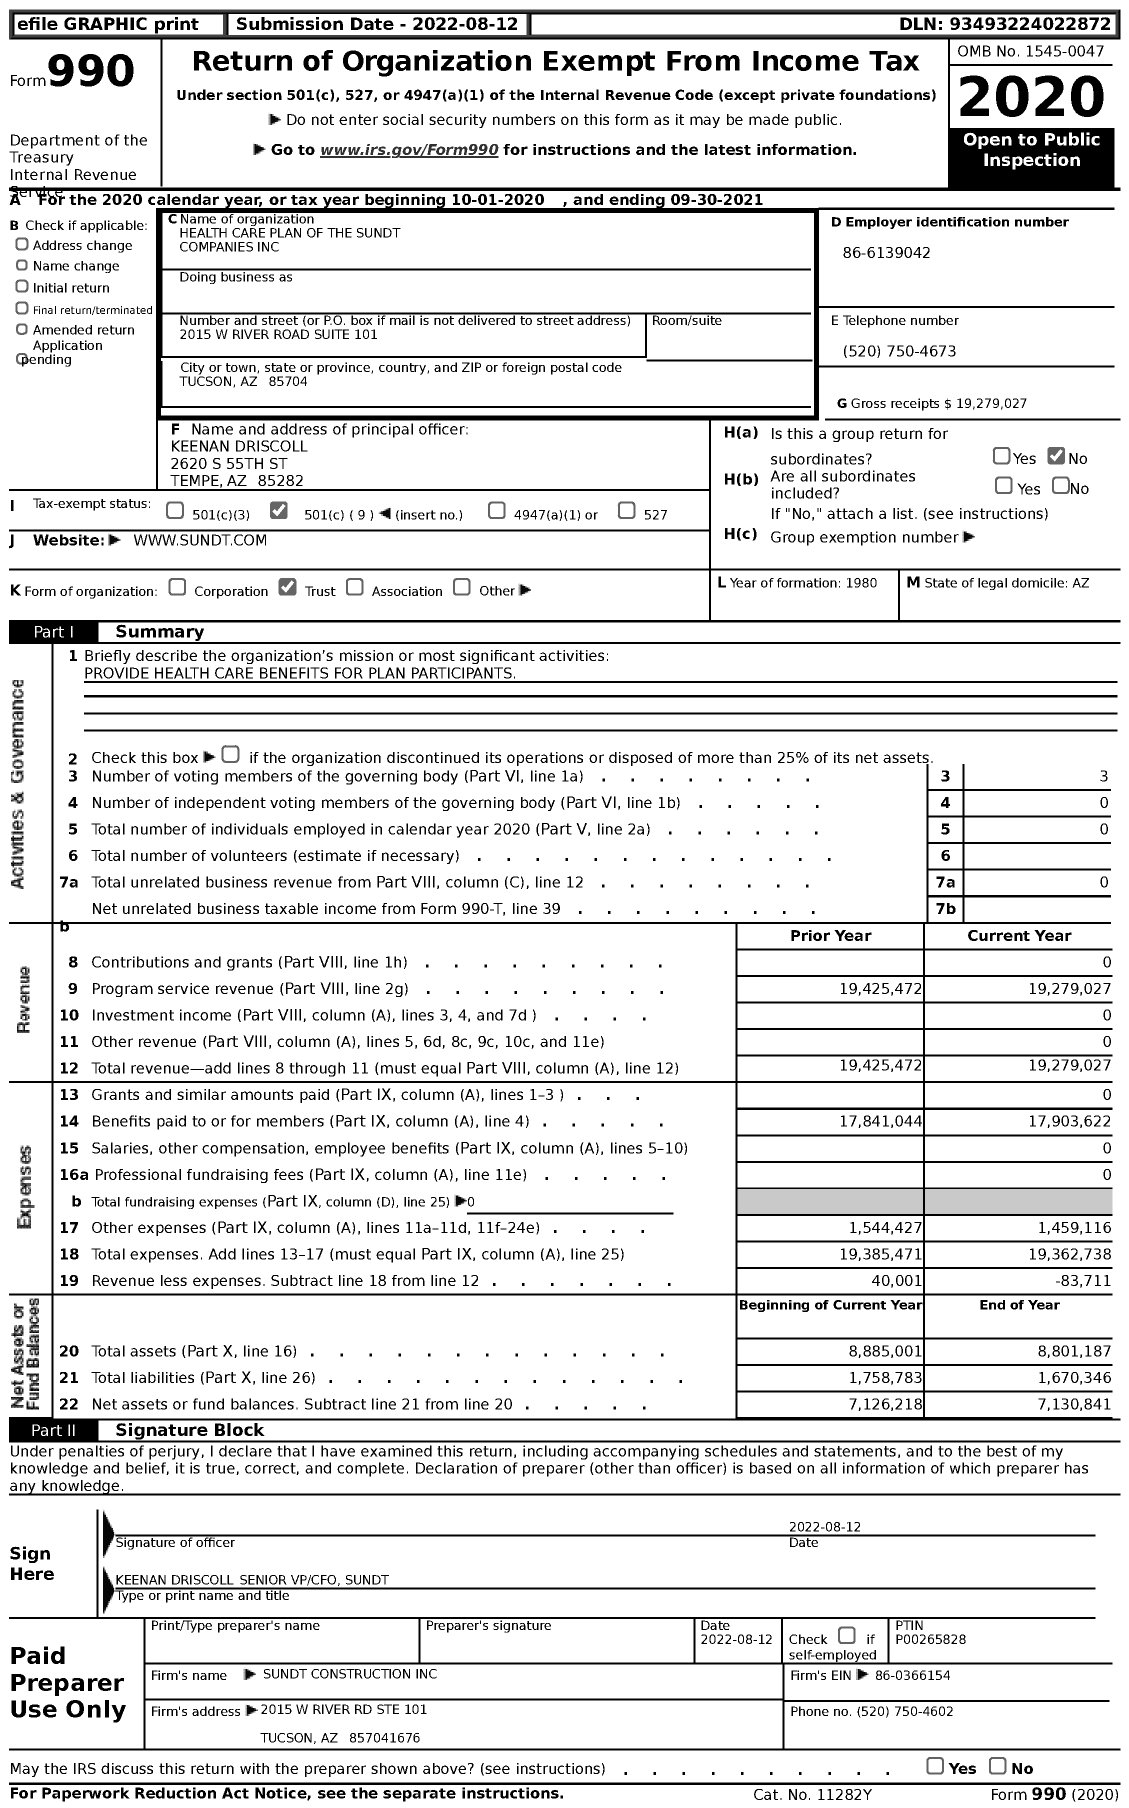 Image of first page of 2020 Form 990 for Health Care Plan of the Sundt Companies